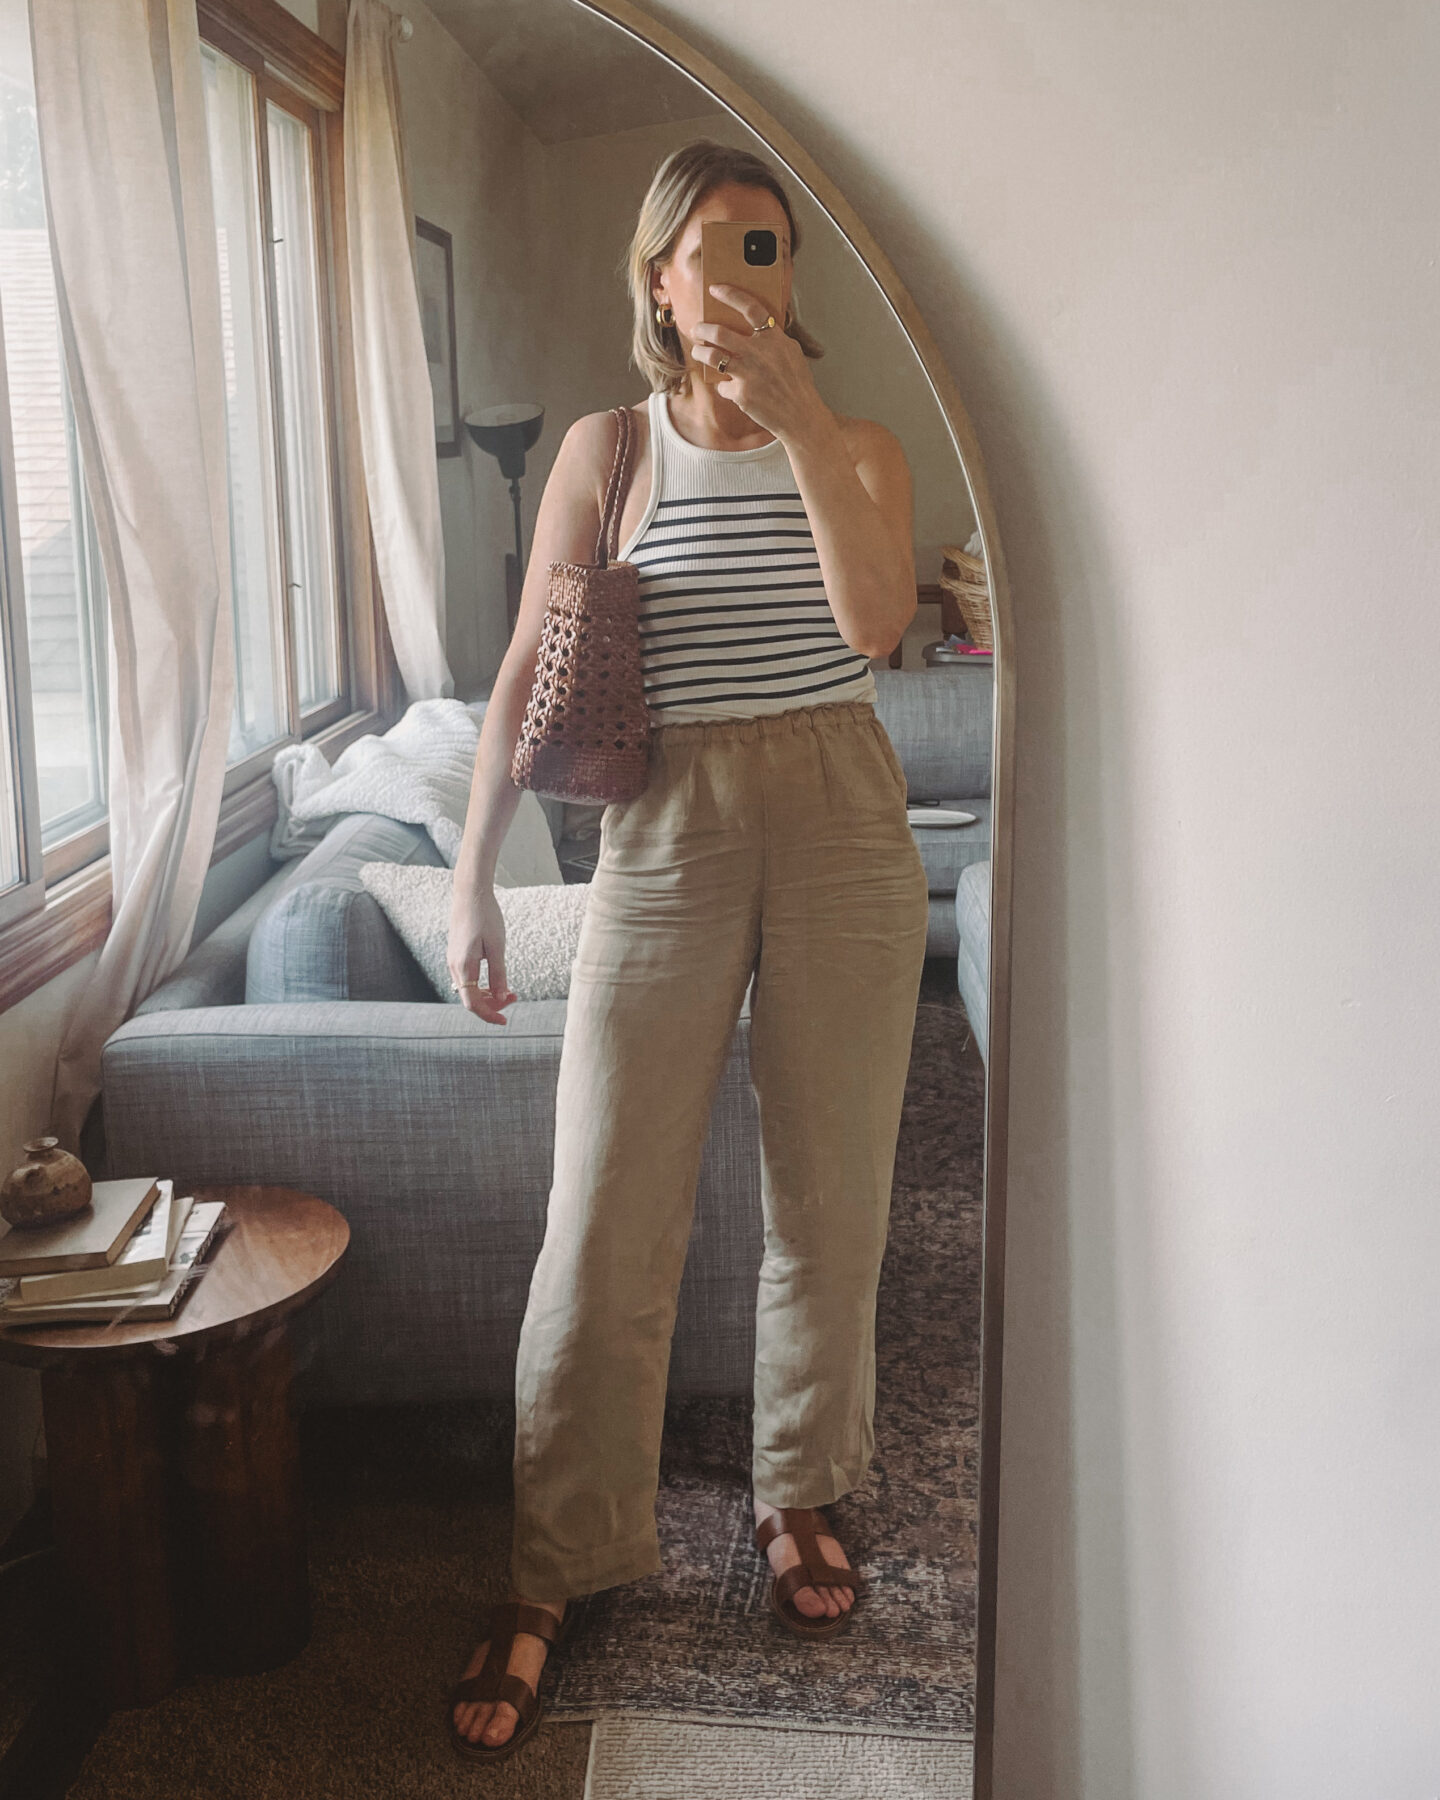 Karin Emily wears a striped tank, brown linen pants, and brown accessories while taking a mirror selfie in her living room